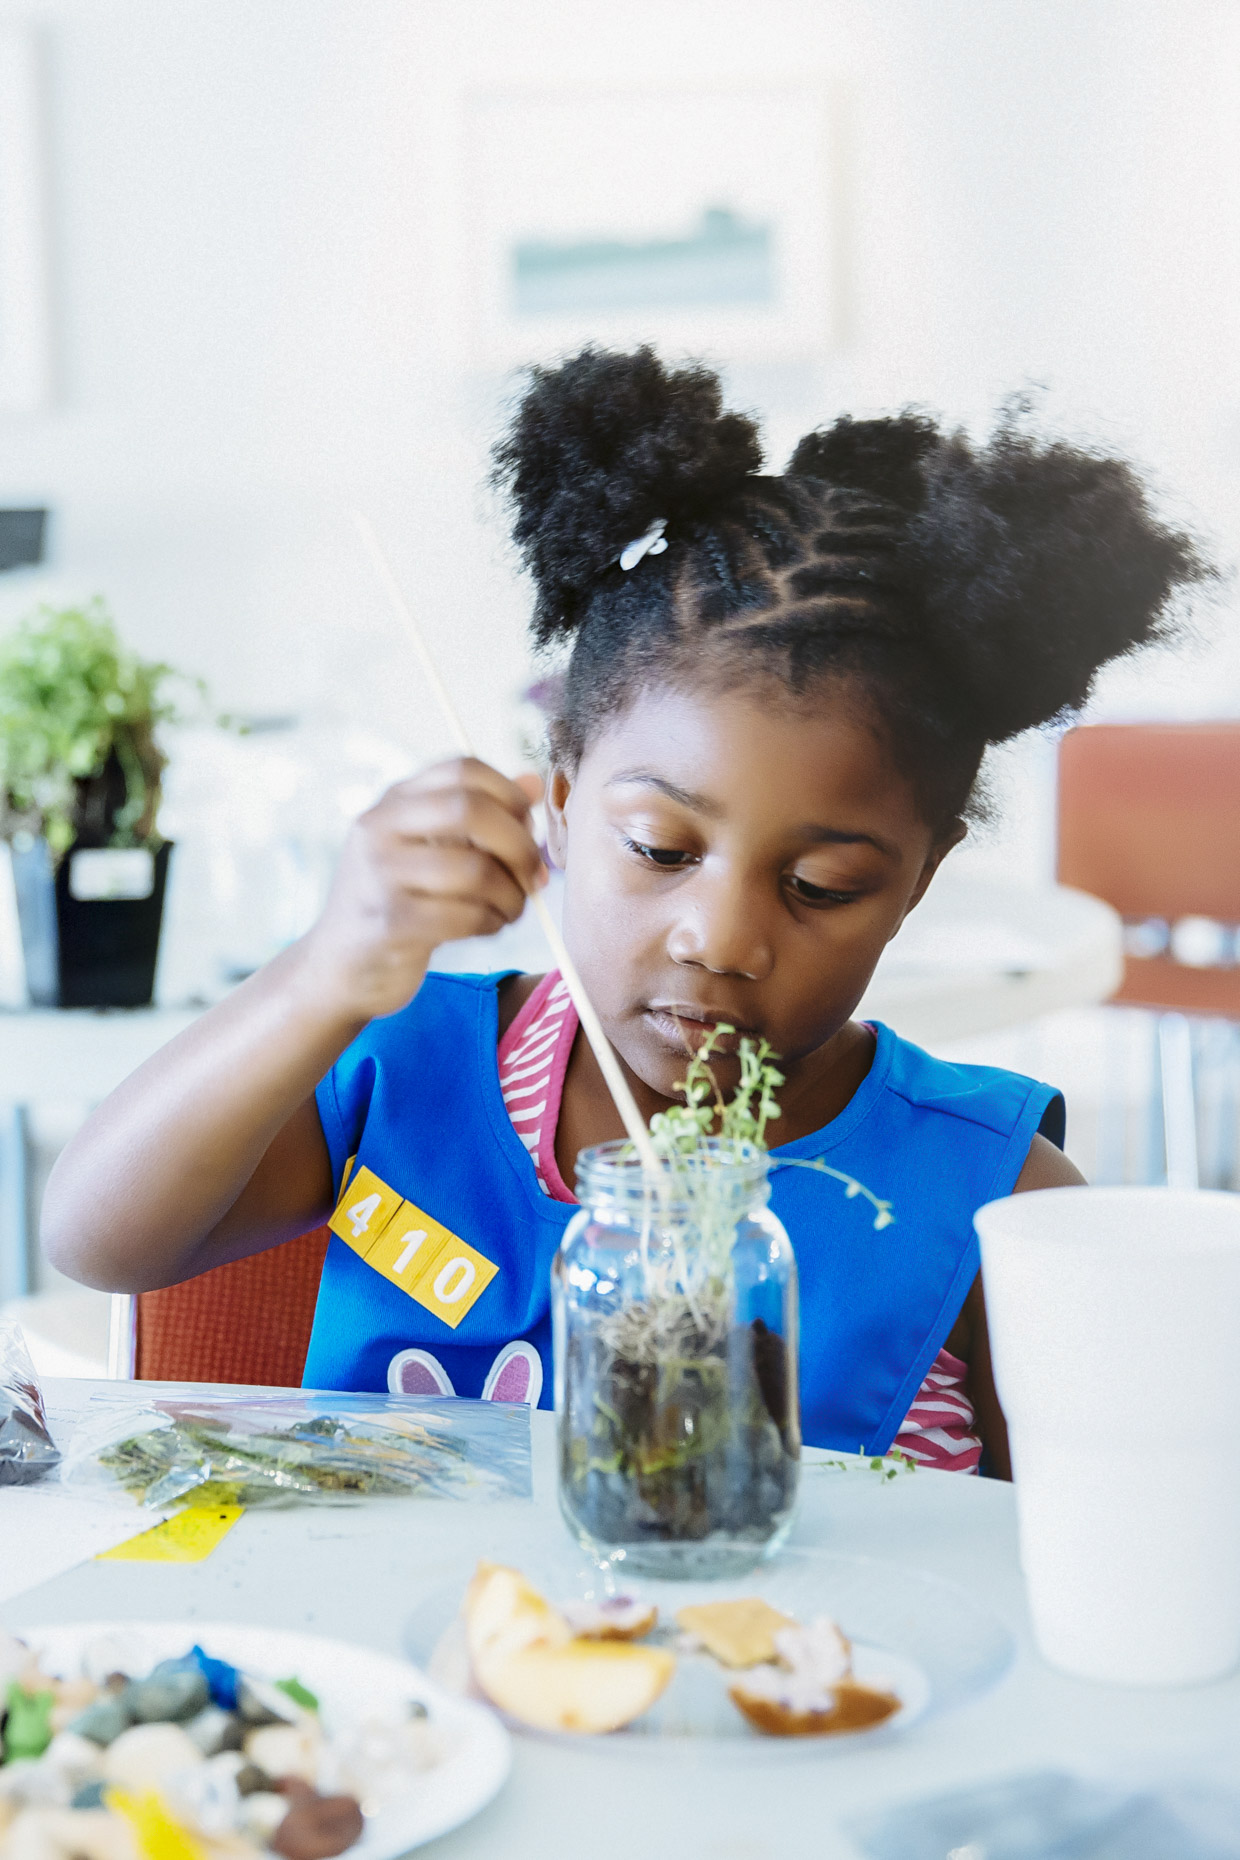 Girl scout with afro puffs planting in glass jar